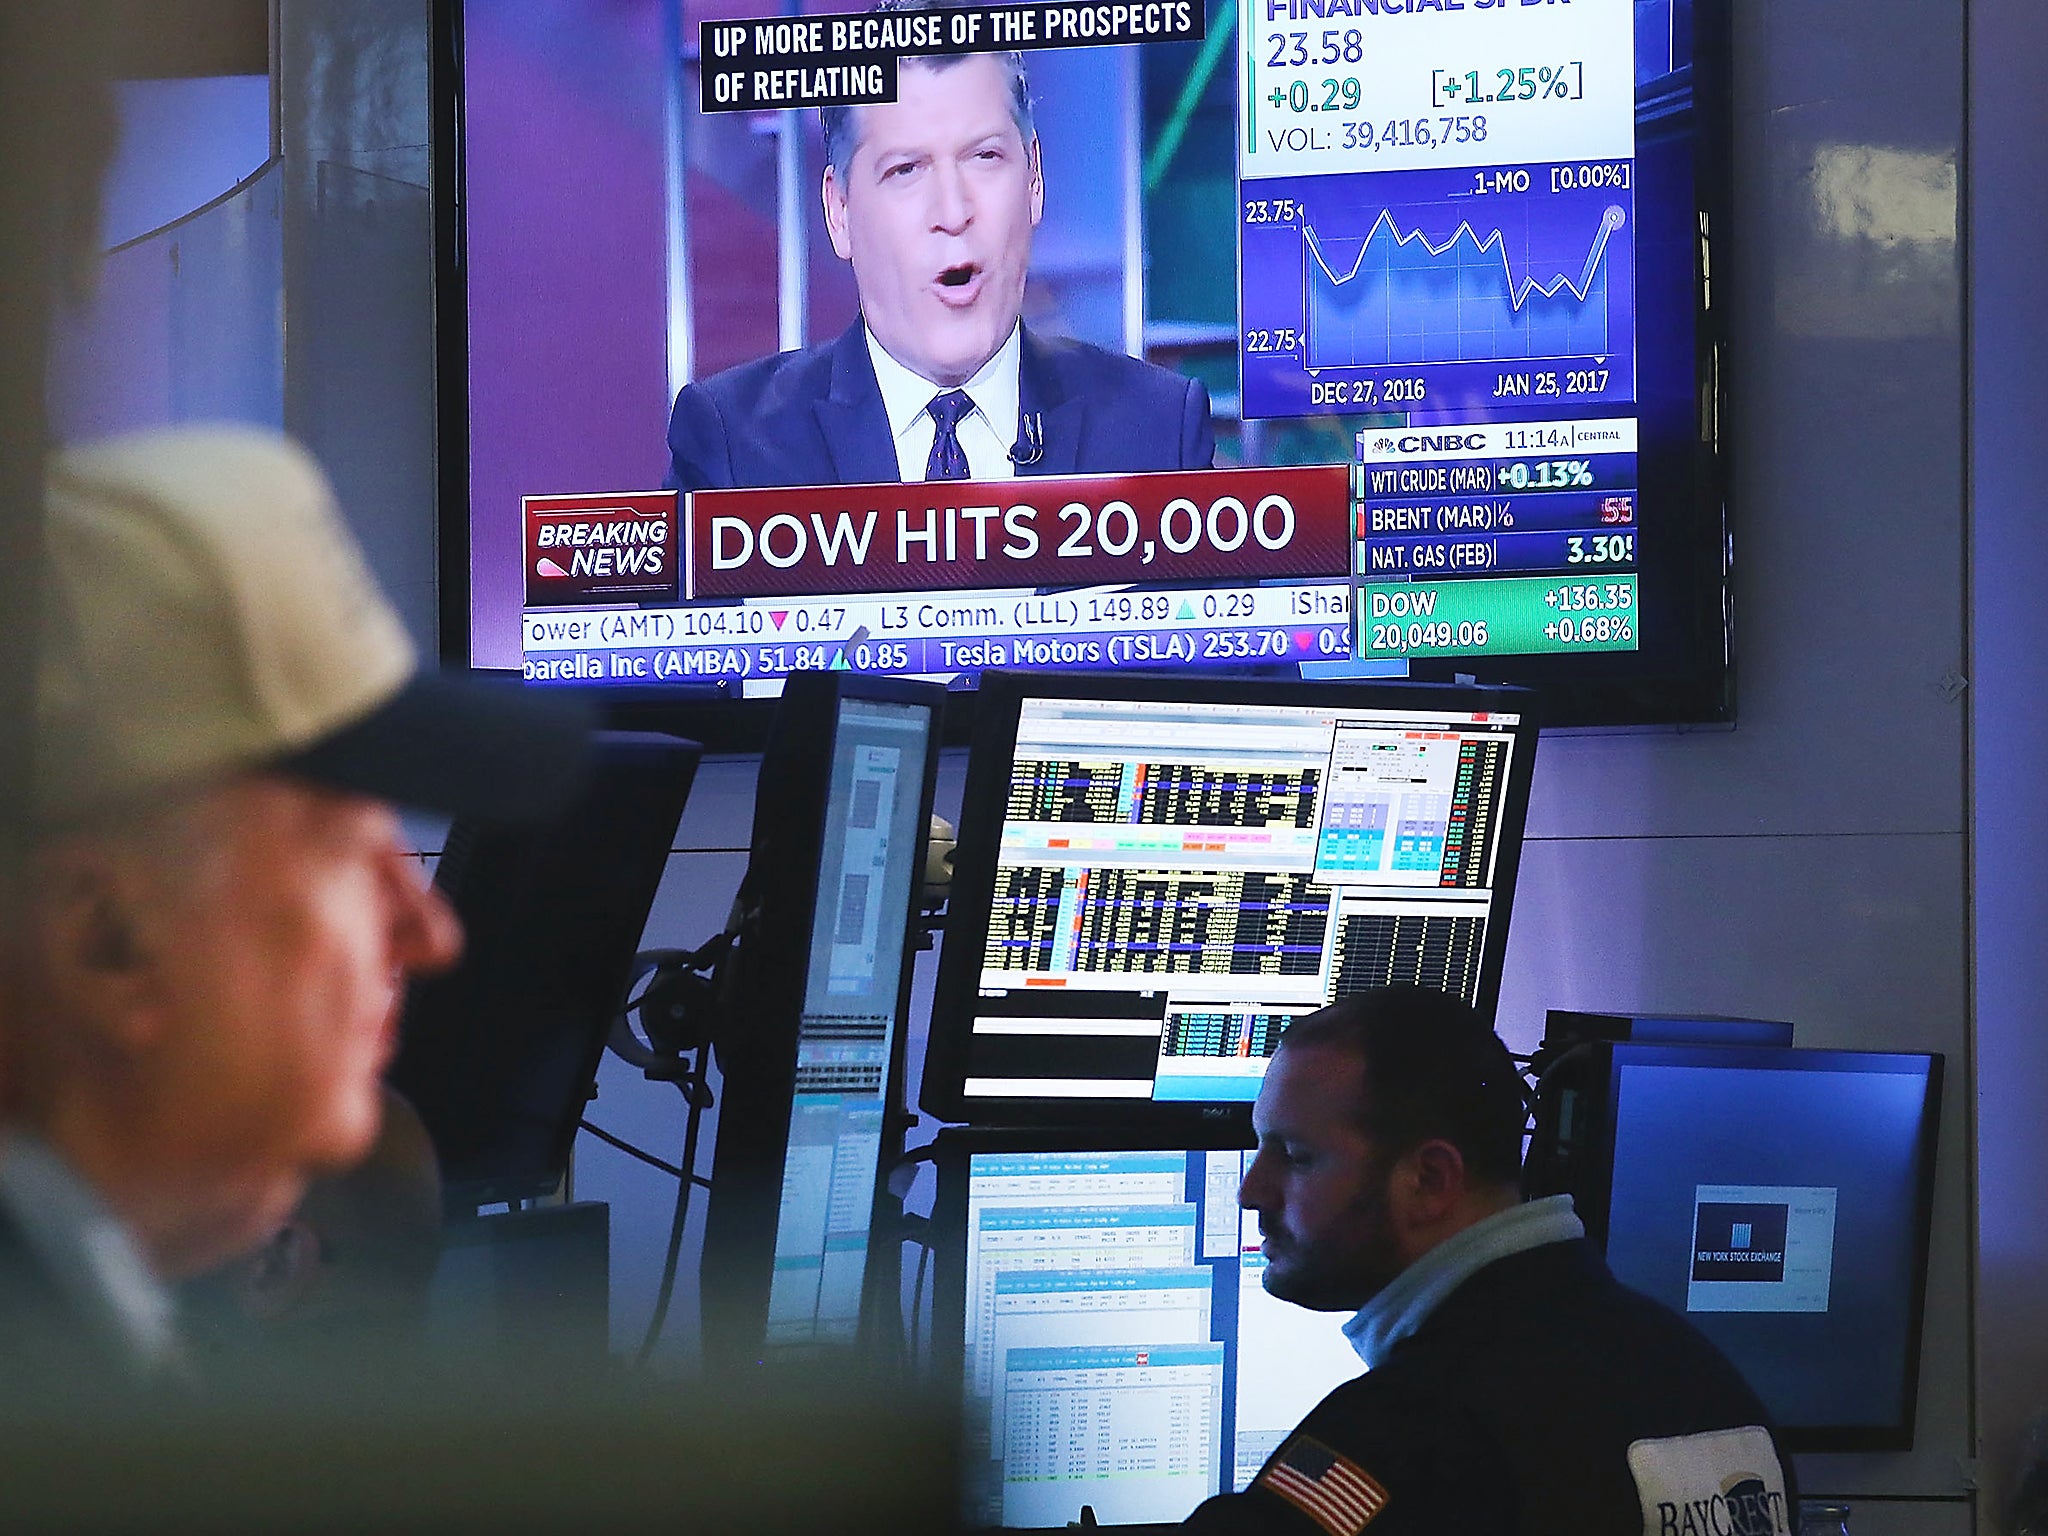 Traders work on the floor of the New York Stock Exchange (NYSE) in late morning trading after the Dow Jones industrial average crossed the 20,000 mark for the first time in New York City. Solid earnings from major companies, including Boeing, led the morning rally